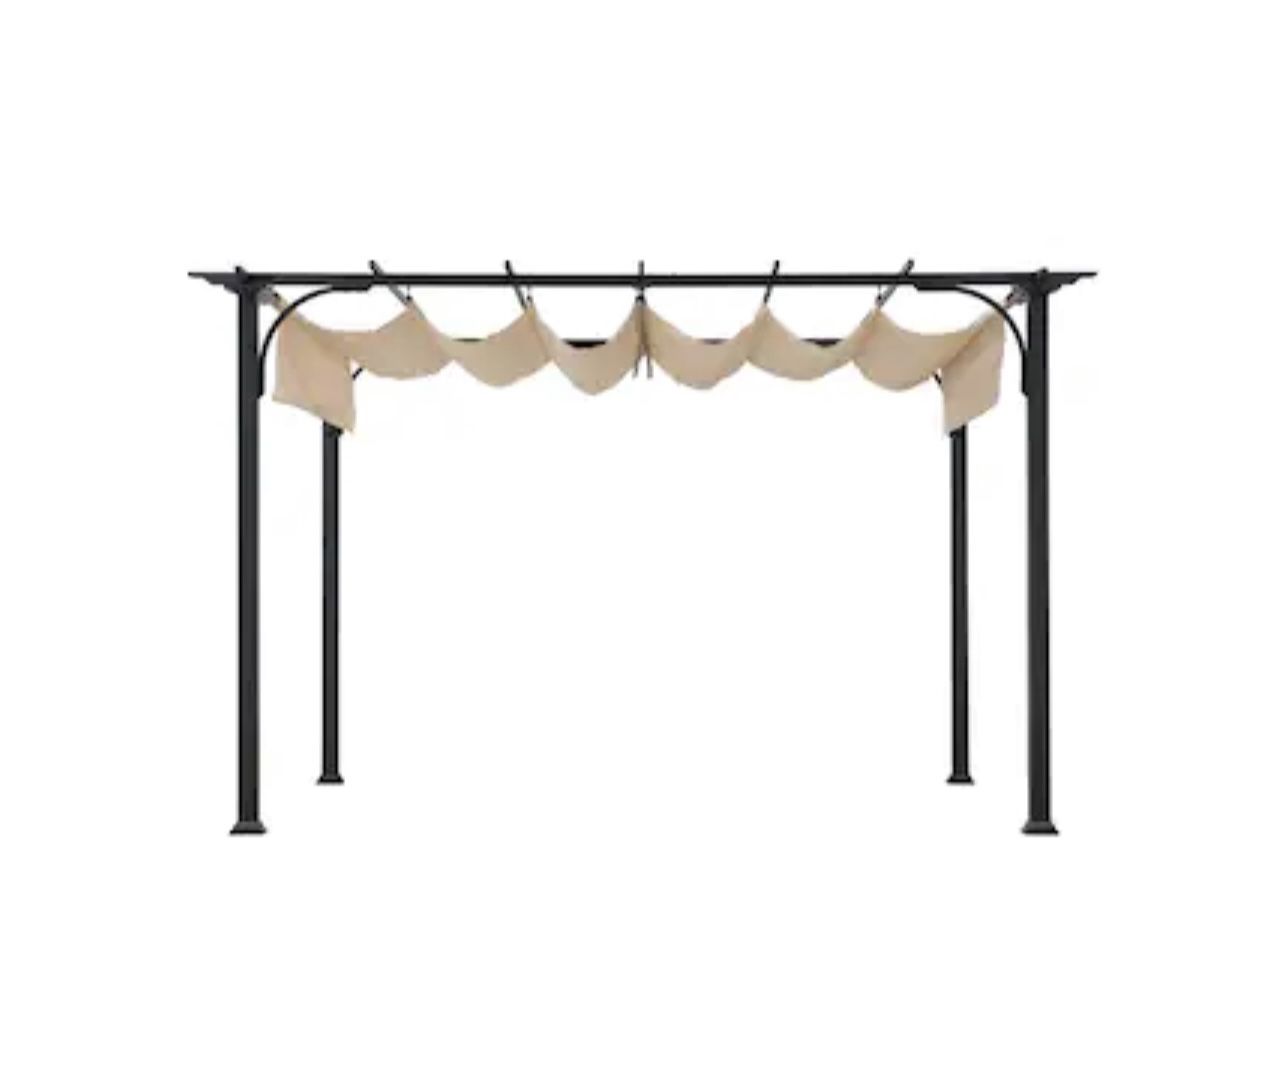 New 10x10 ft. Outdoor Patio Brown Steel Classic Frame Pergola with Retractable White Canopy Shade